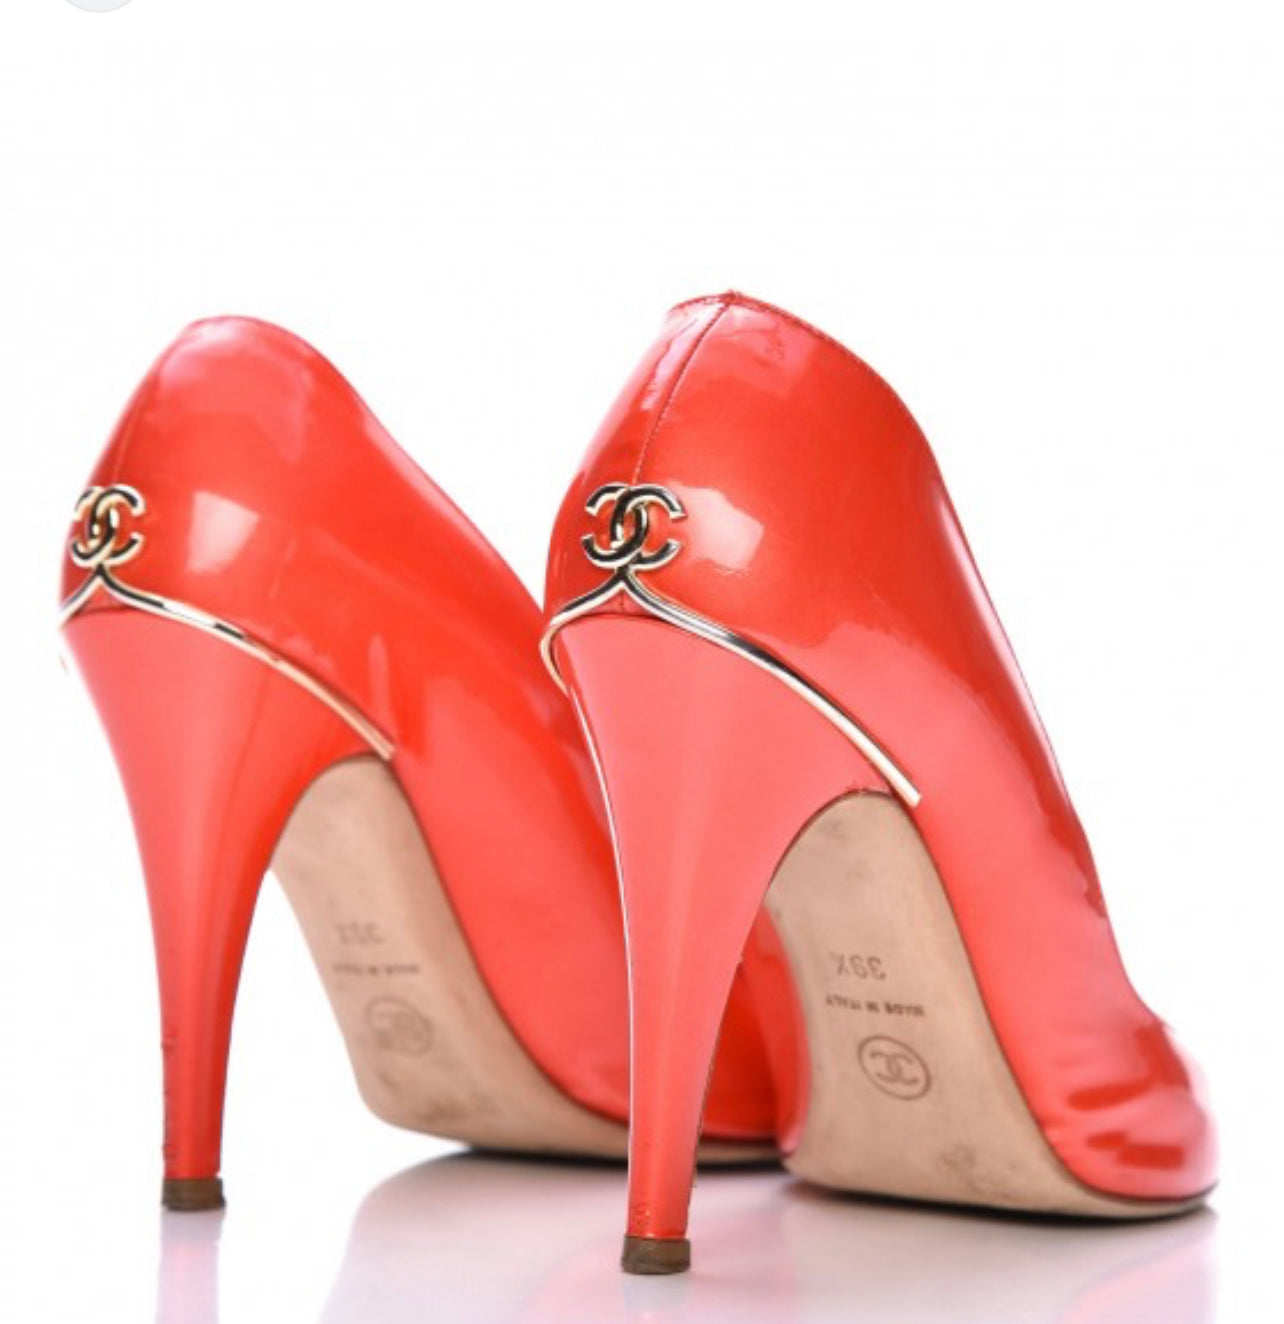 Chanel Coral Heels 2008 Cruise Collection